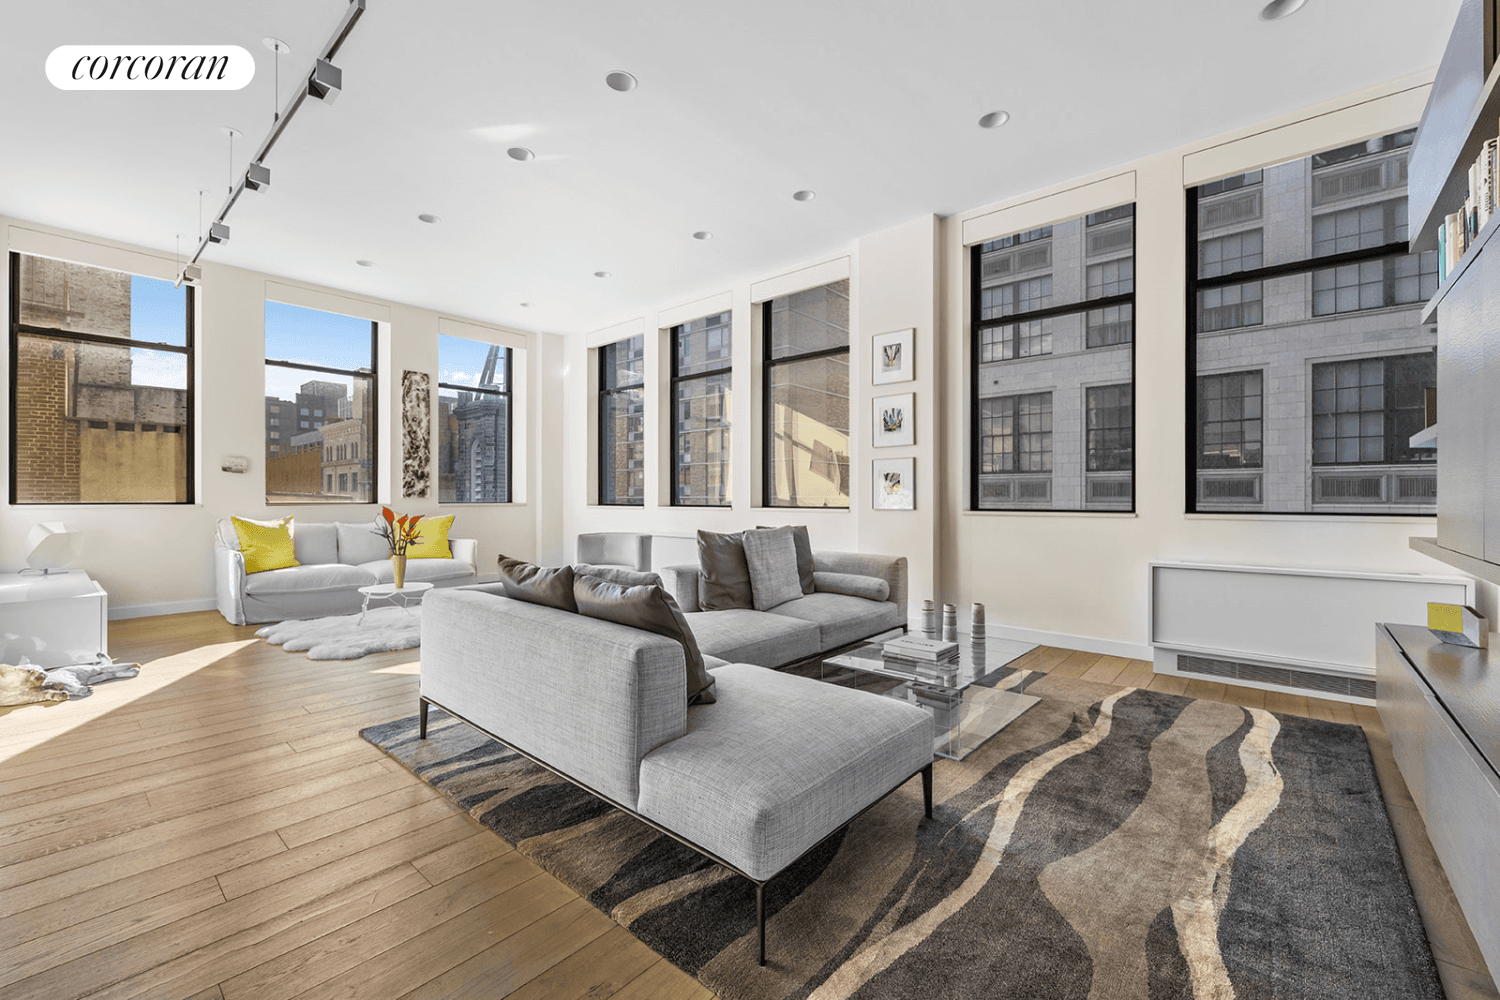 Welcome home to Apartment 5F at 115 4th Avenue, a gut renovated 2 bedroom, 2 bathroom breathtaking loft residence with 1, 790 square feet of living space in a highly ...